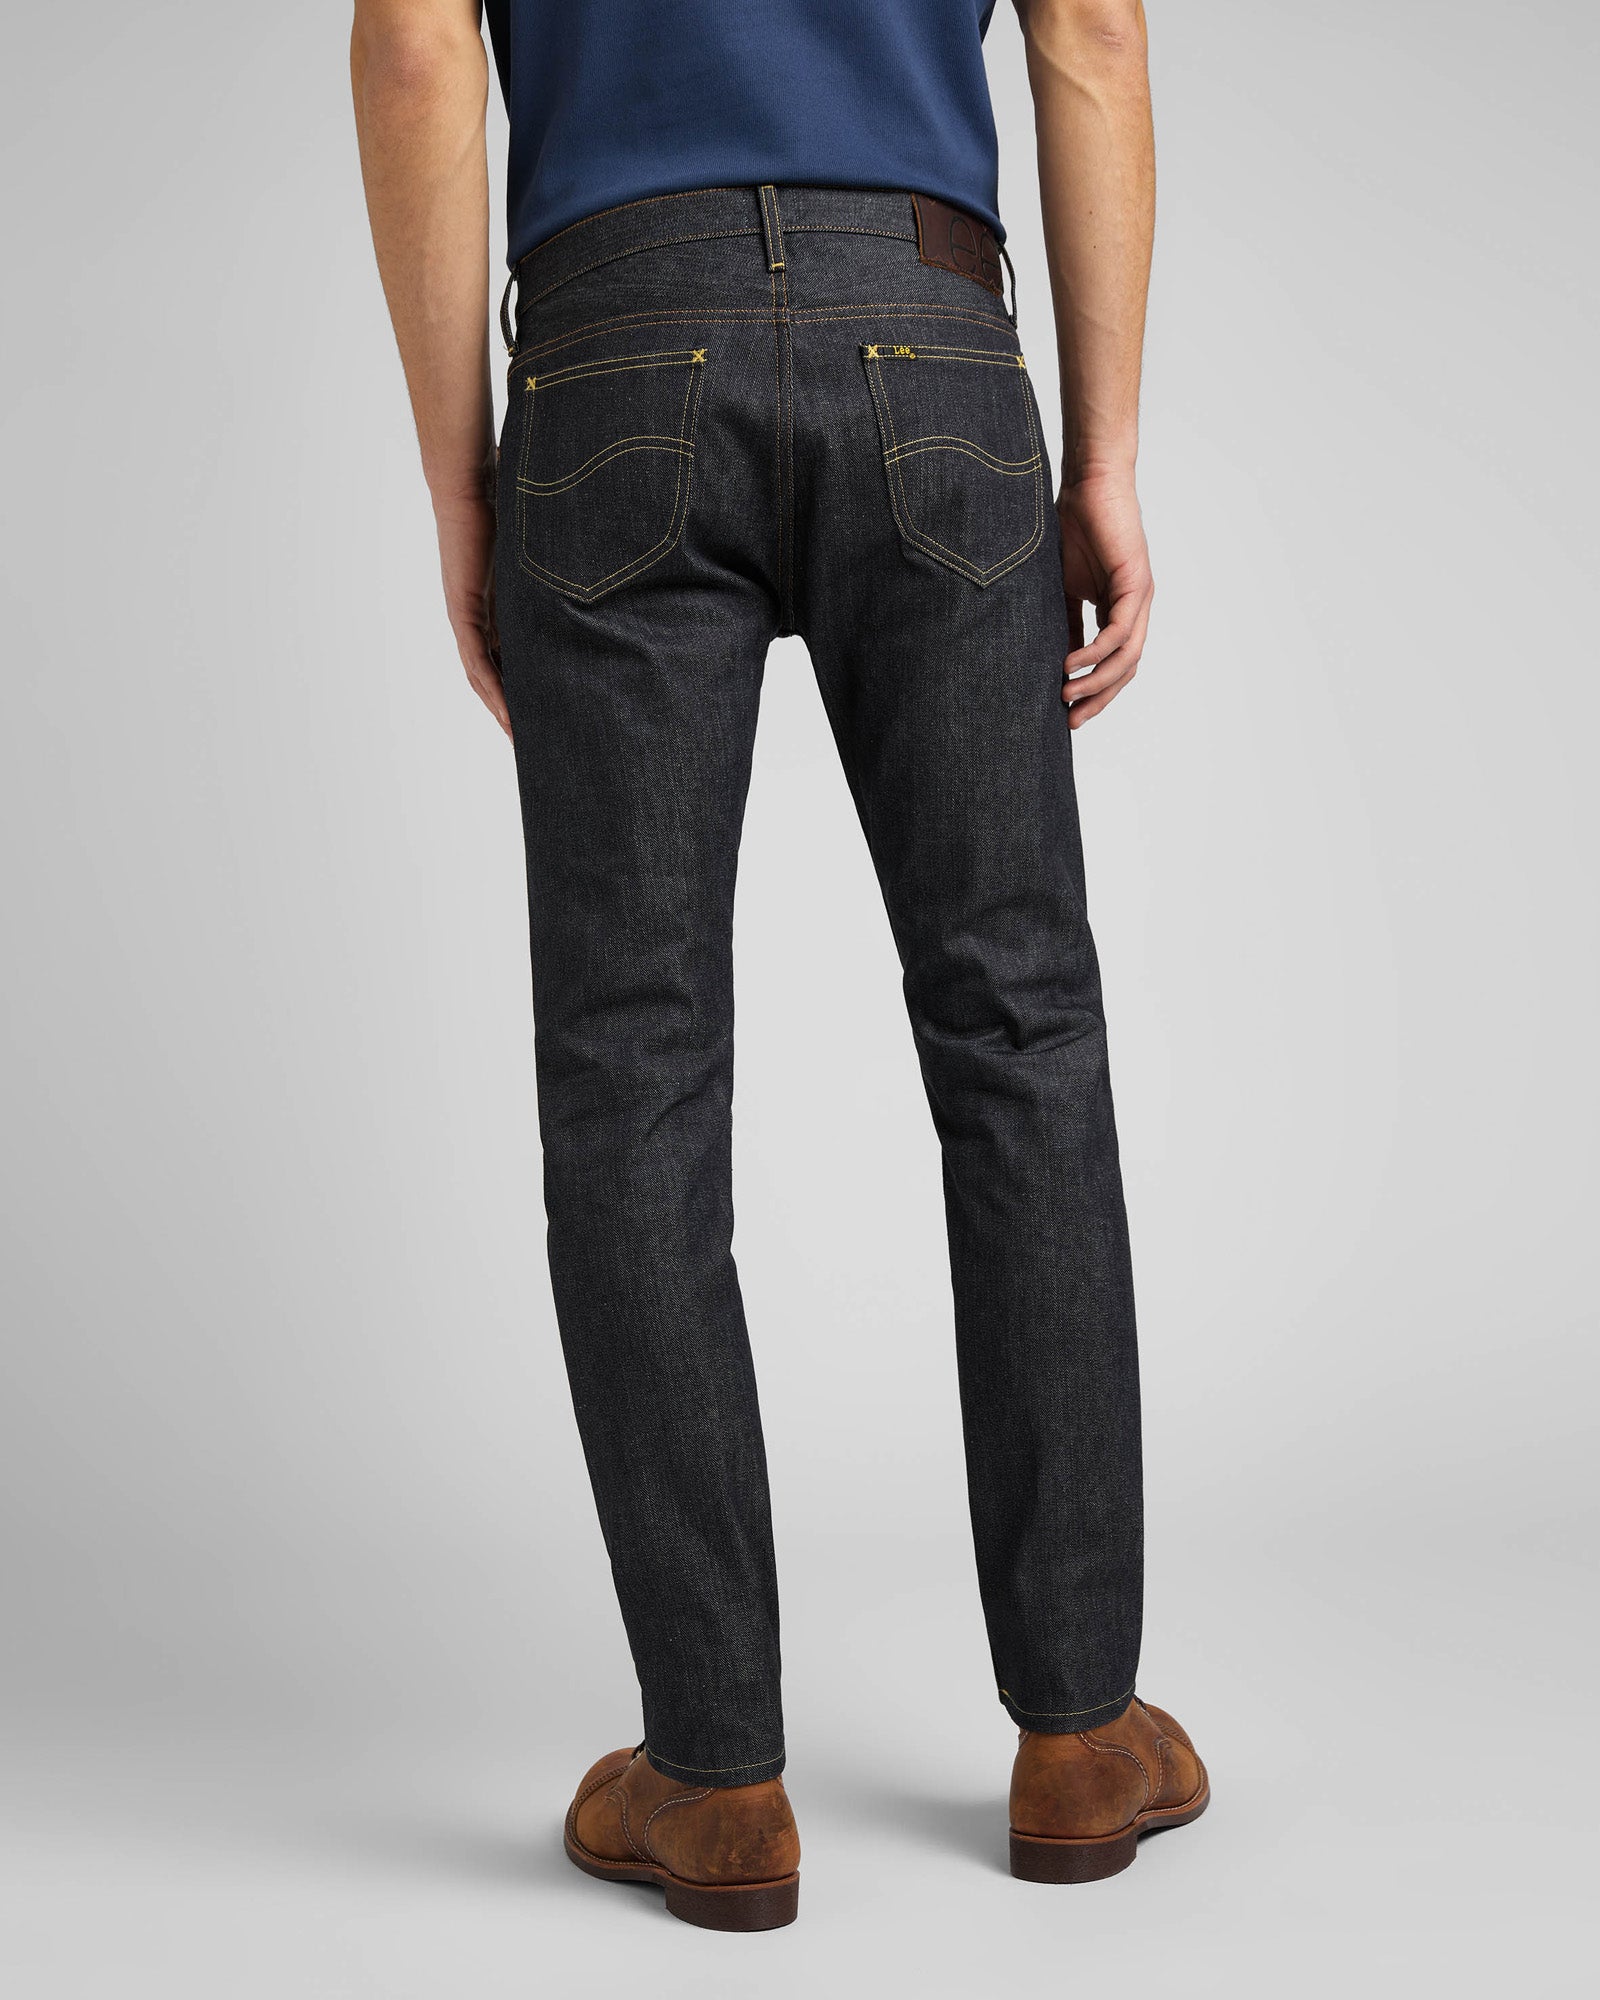 Lee 101 Rider Slim Fit Recycled Cotton 15oz Selvedge Mens Jeans - Dry ...